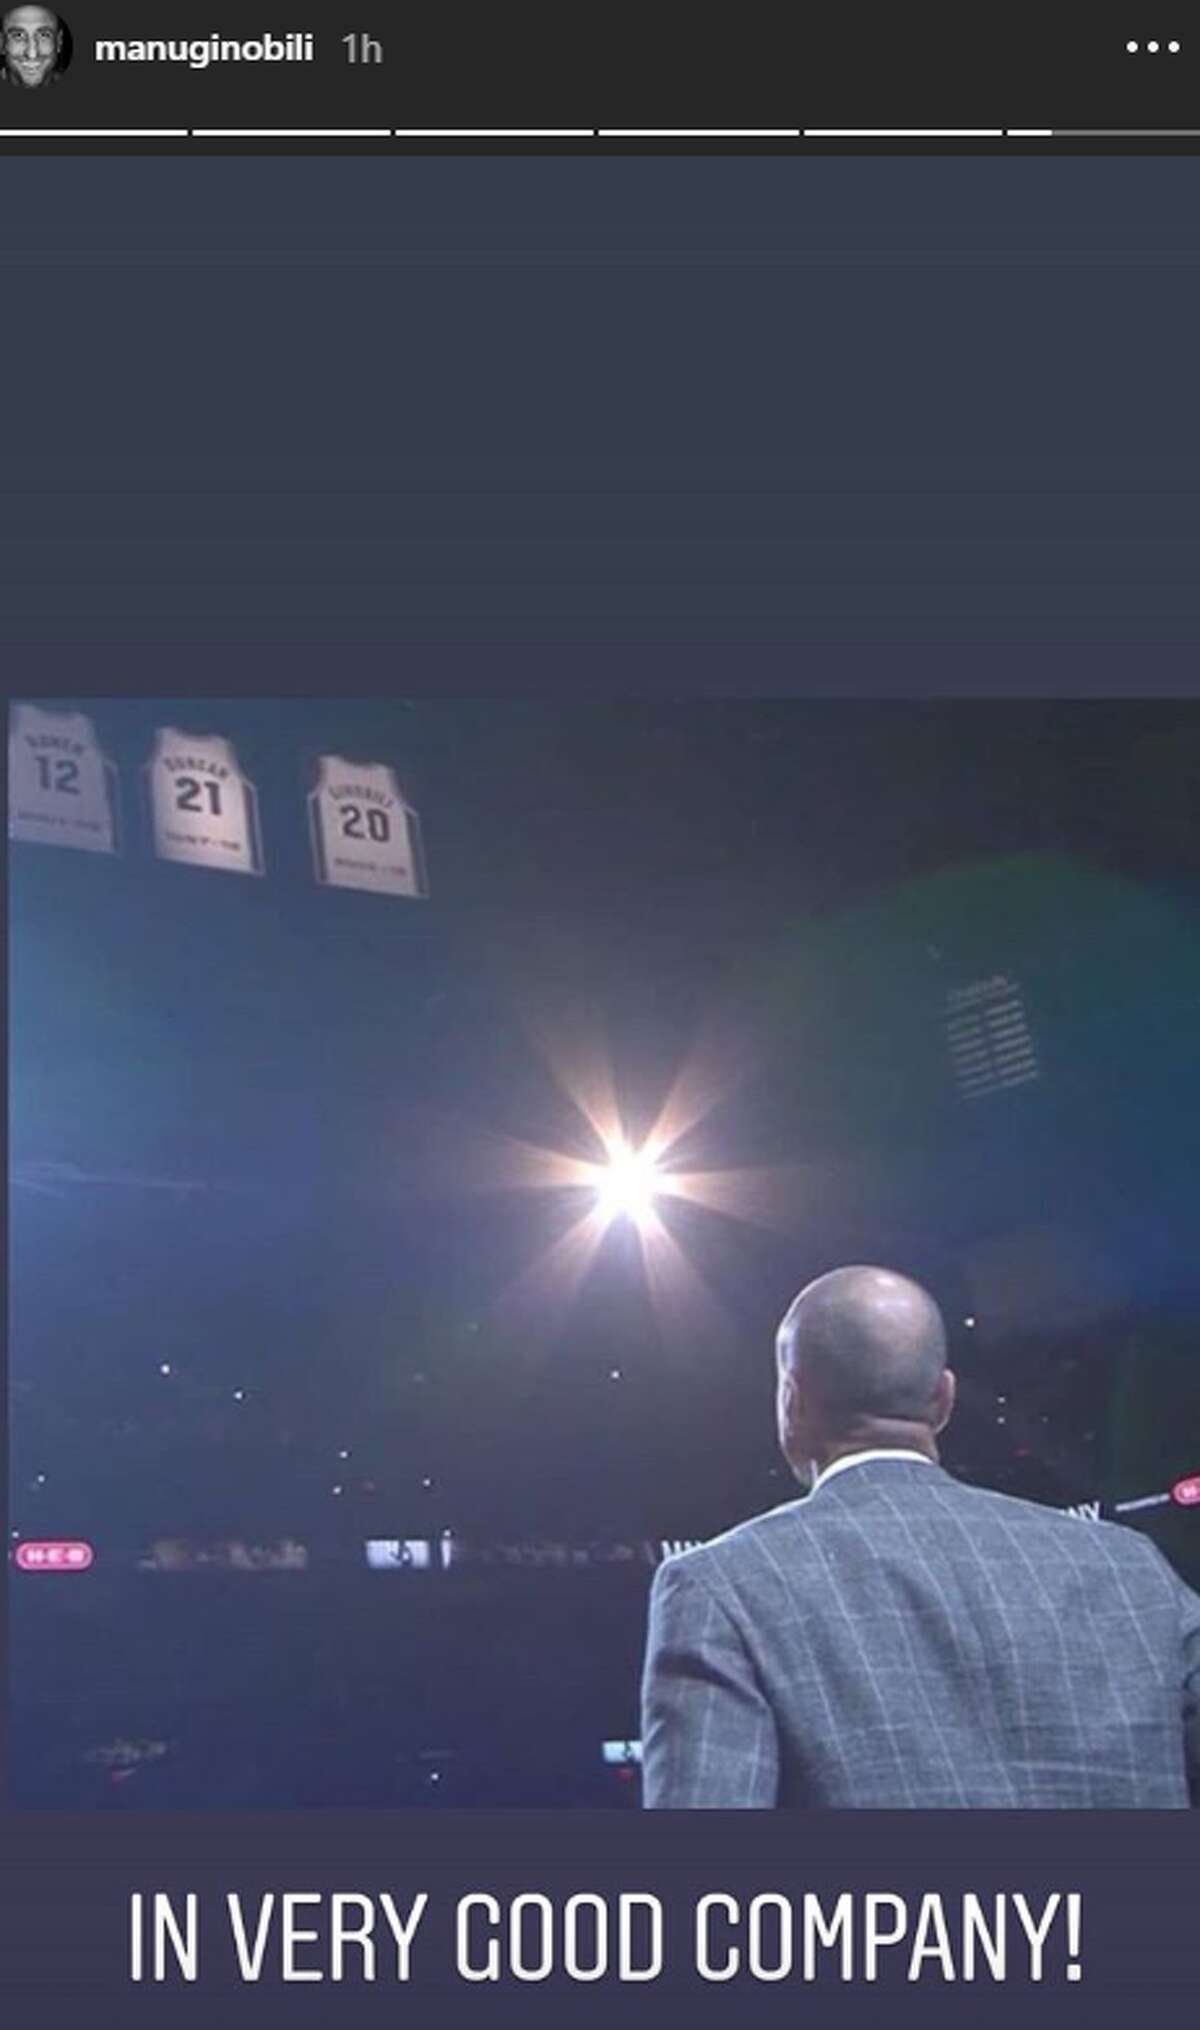 Manu Ginobili summed up his highlights of the night via his Instagram story feature.